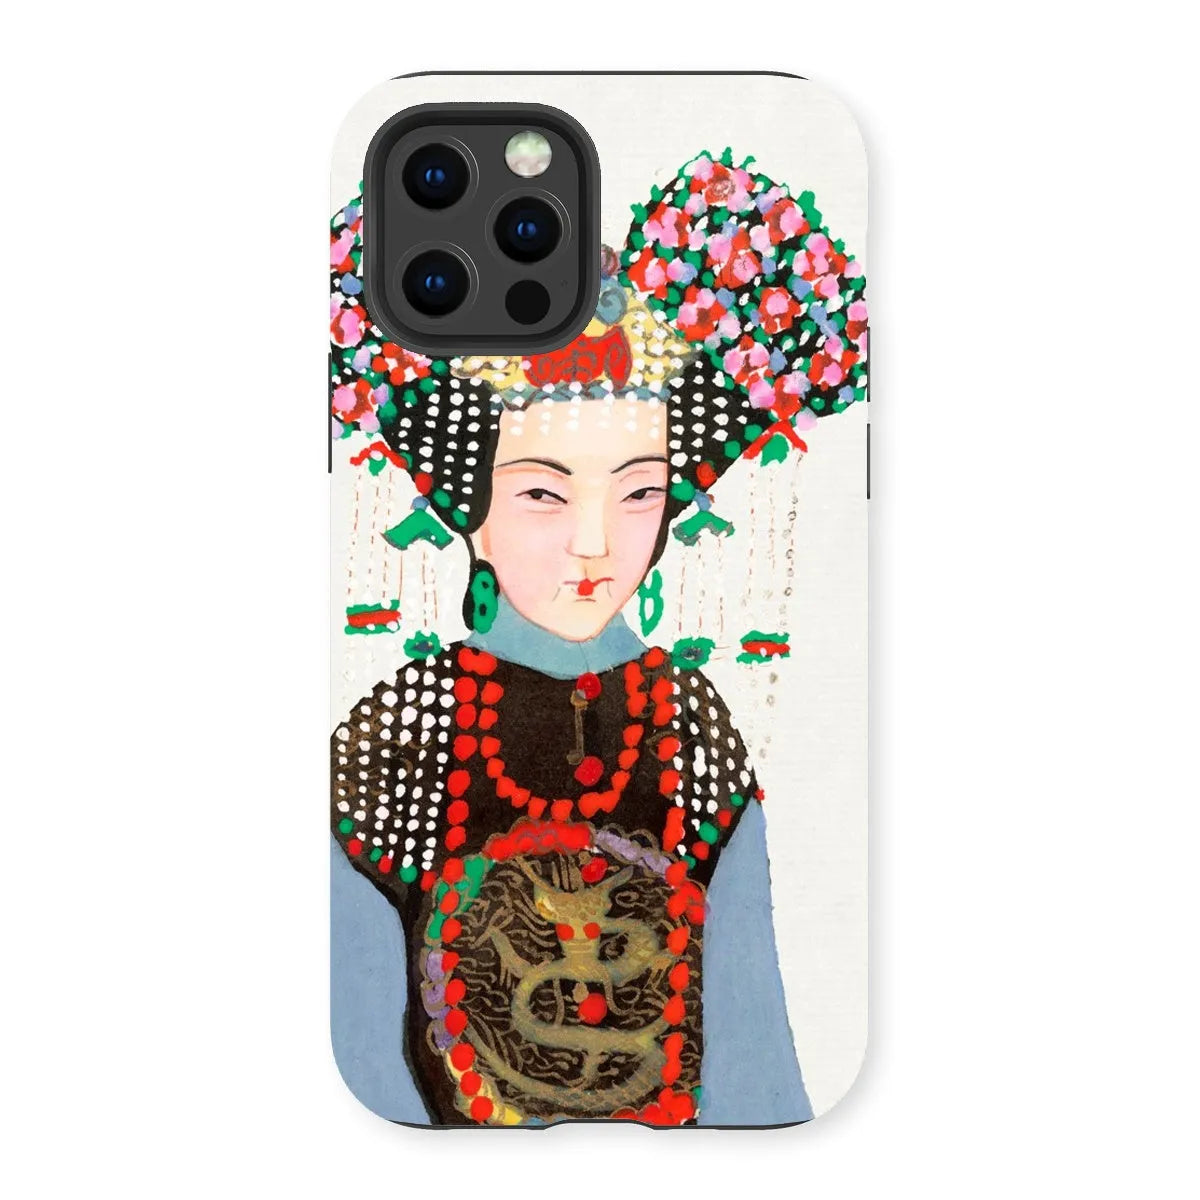 Chinese Empress - Manchu Art Phone Case - Iphone 13 Pro / Matte - Mobile Phone Cases - Aesthetic Art